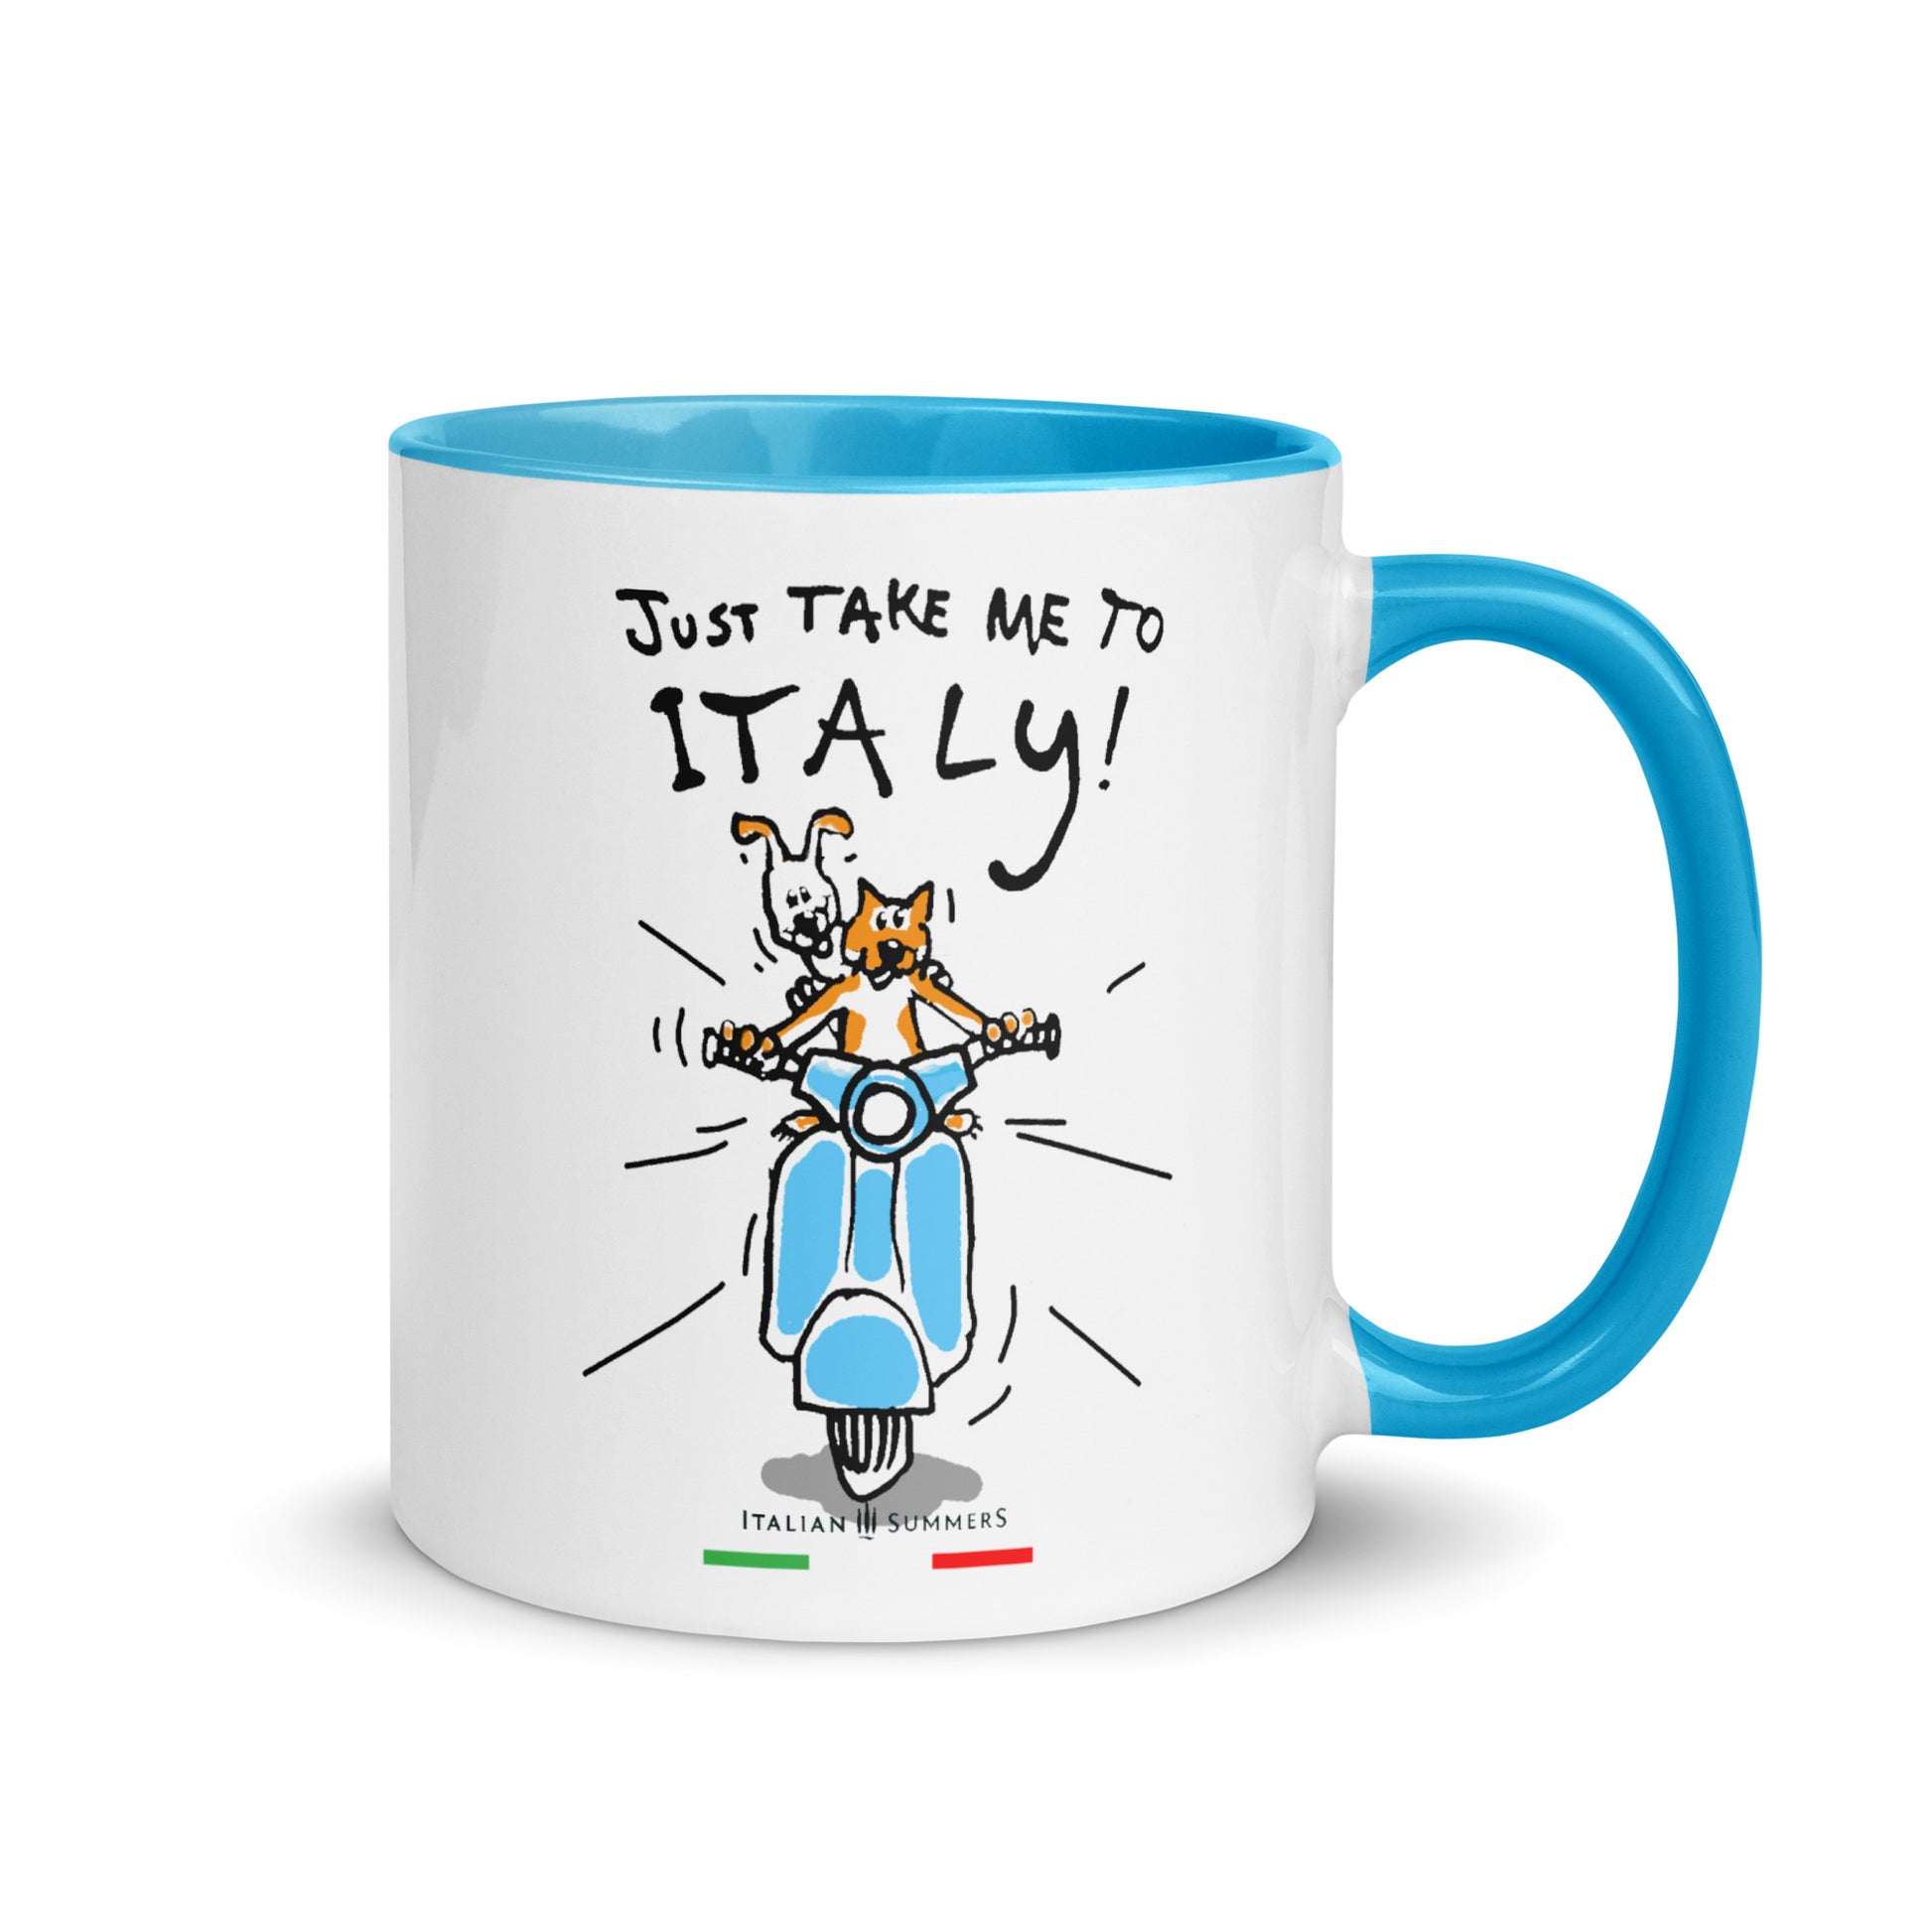 taly inspired coffee mug with a sketch of a cat and dog, (seen from the front) driving to Italy. The red cat is driving, the white dog with brown floppy ears sits in the back and looks over the shoulder of the cat. A vintage blue Vespa. The mug has the quote Just take me to Italy! Made by Italian Summers